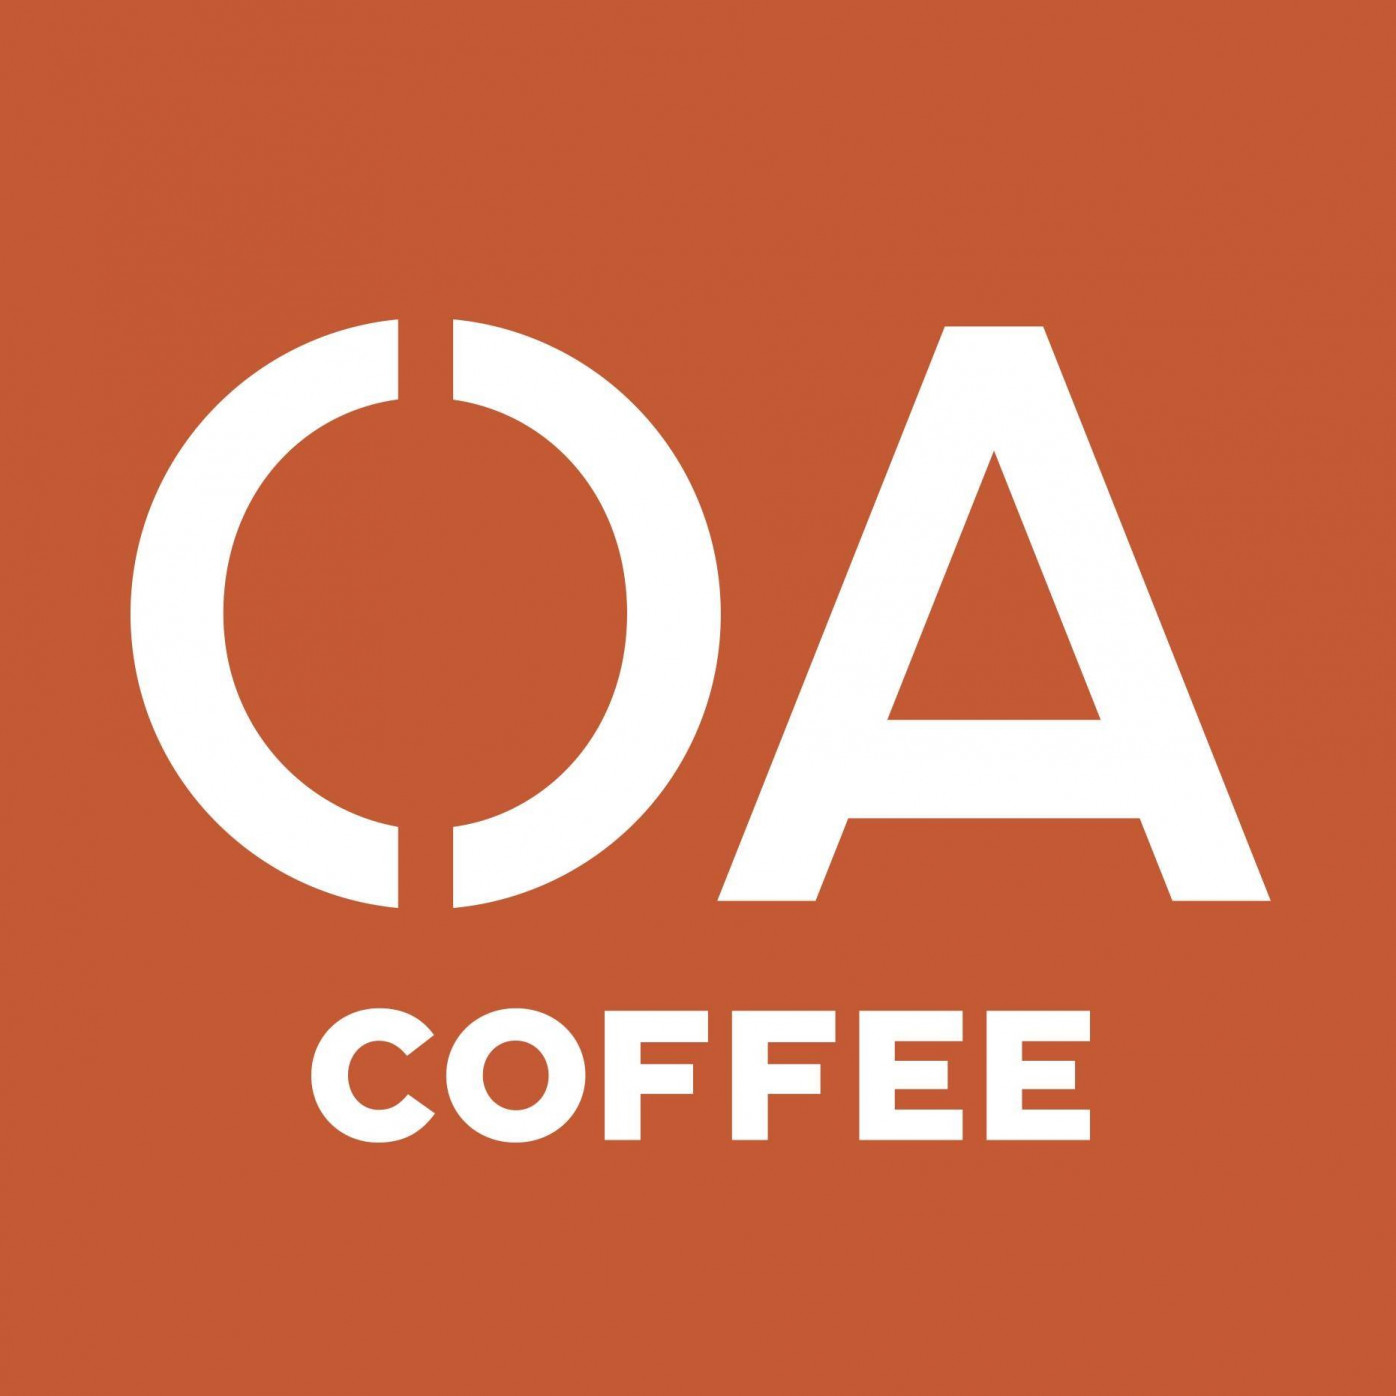 OA COFFEE AS - Processing of tea and coffee in Rae vald